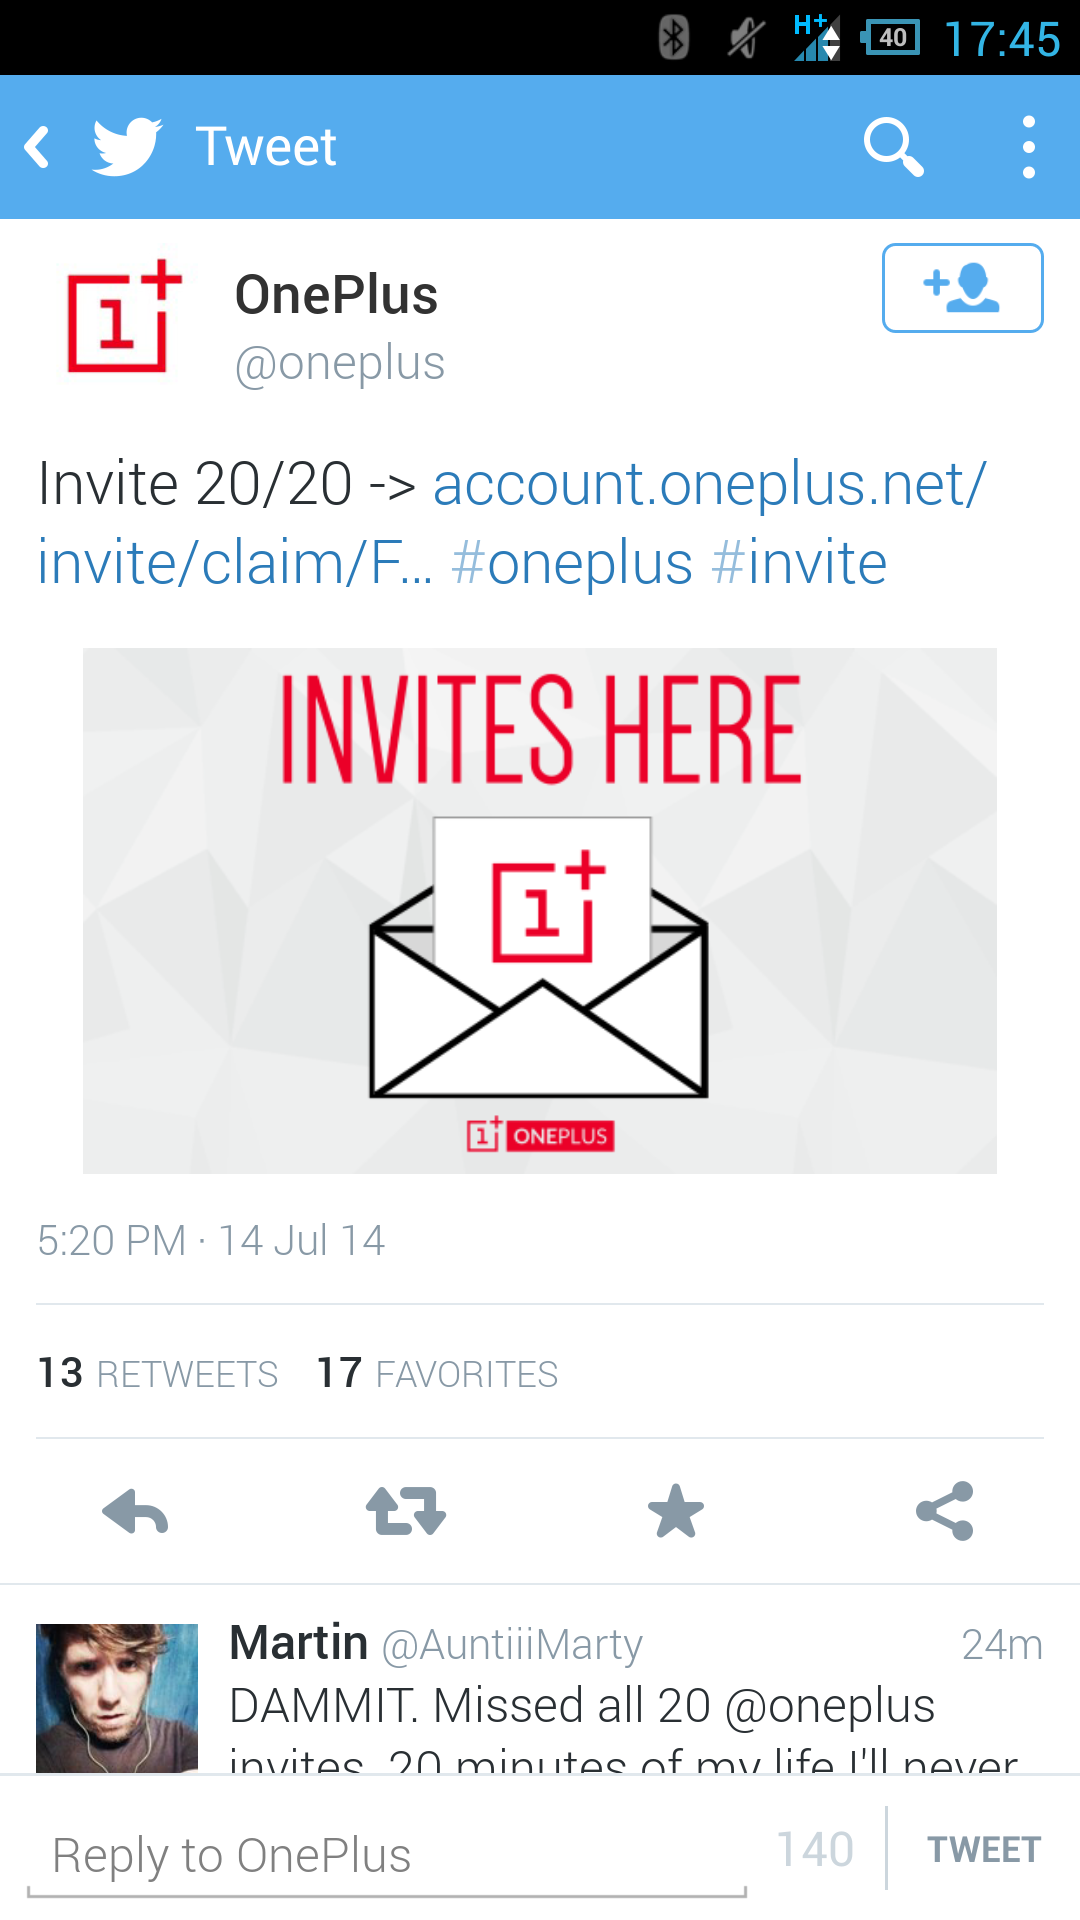 Getting hold of a OnePlus One. Invites snapped up super quick